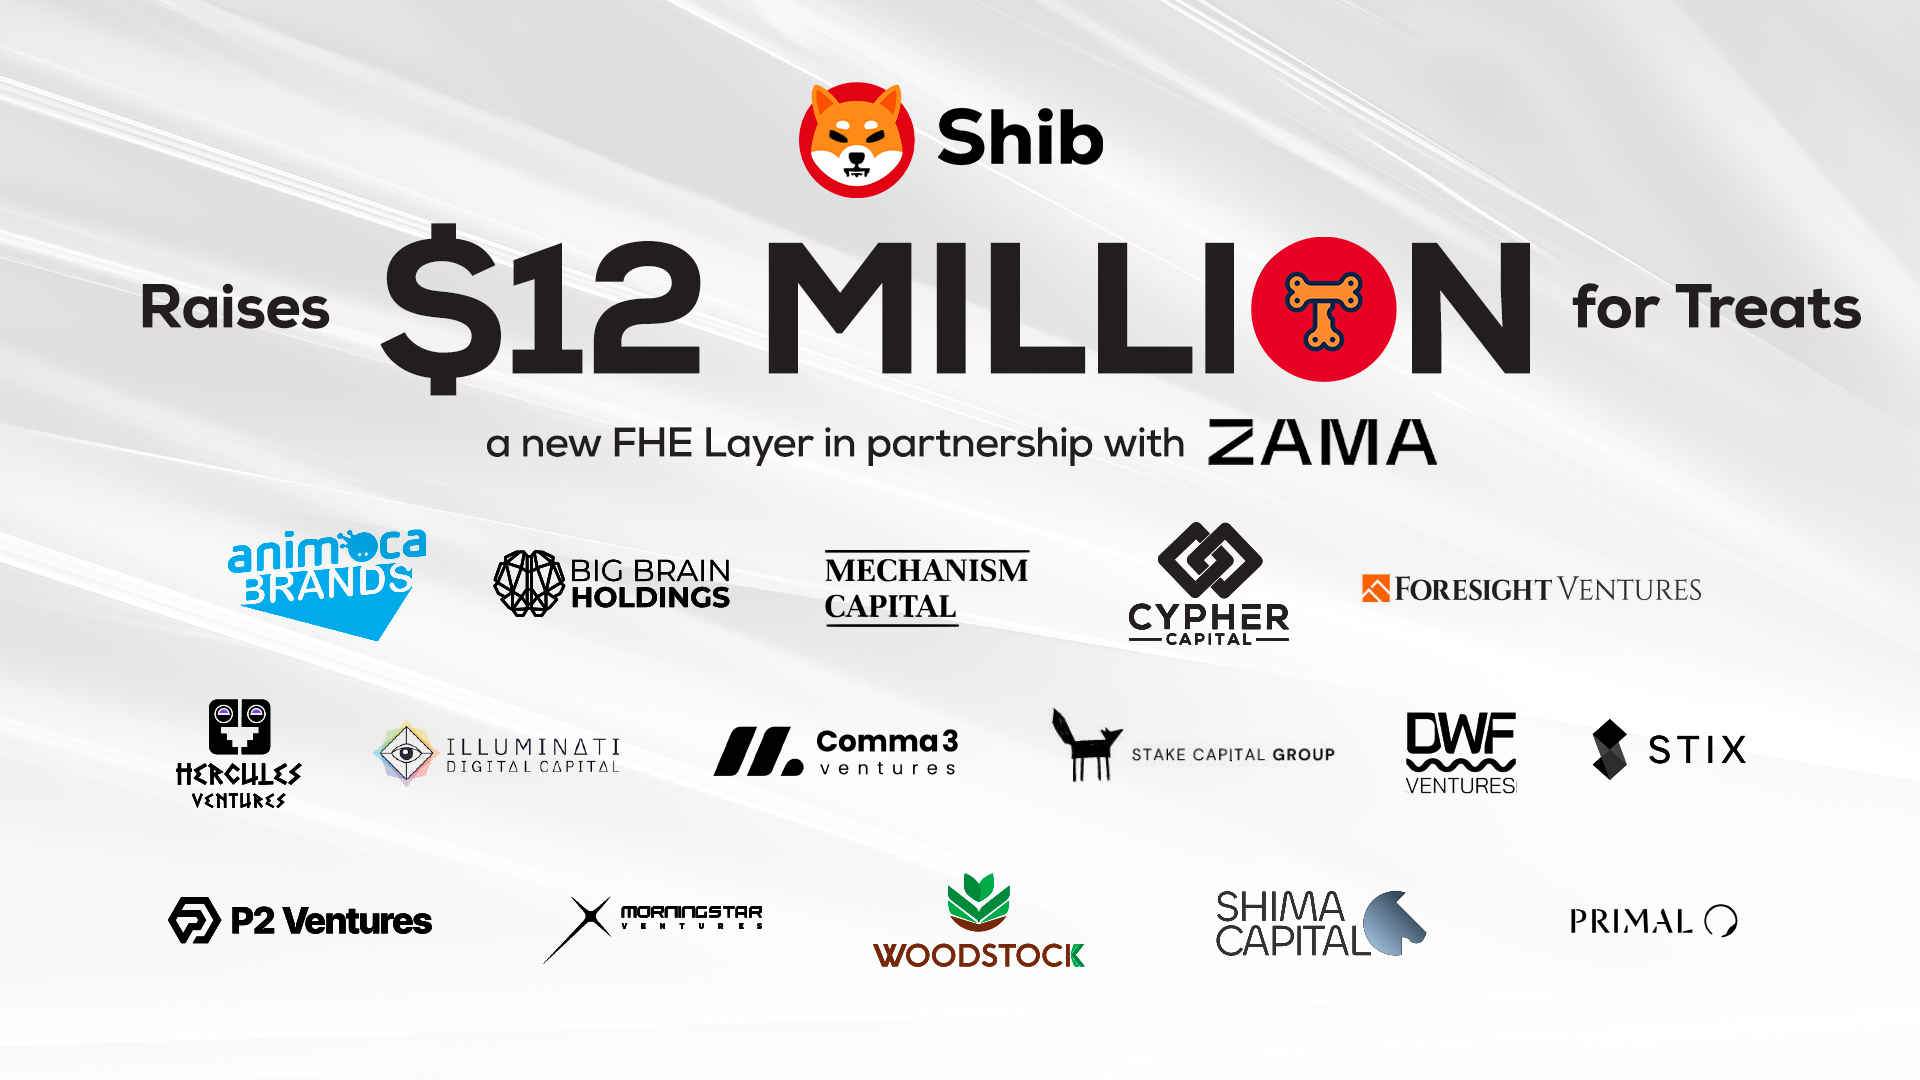 In a new $12 million funding round, Shiba Inu has added serious investor firepower from names like Animoca Brands.